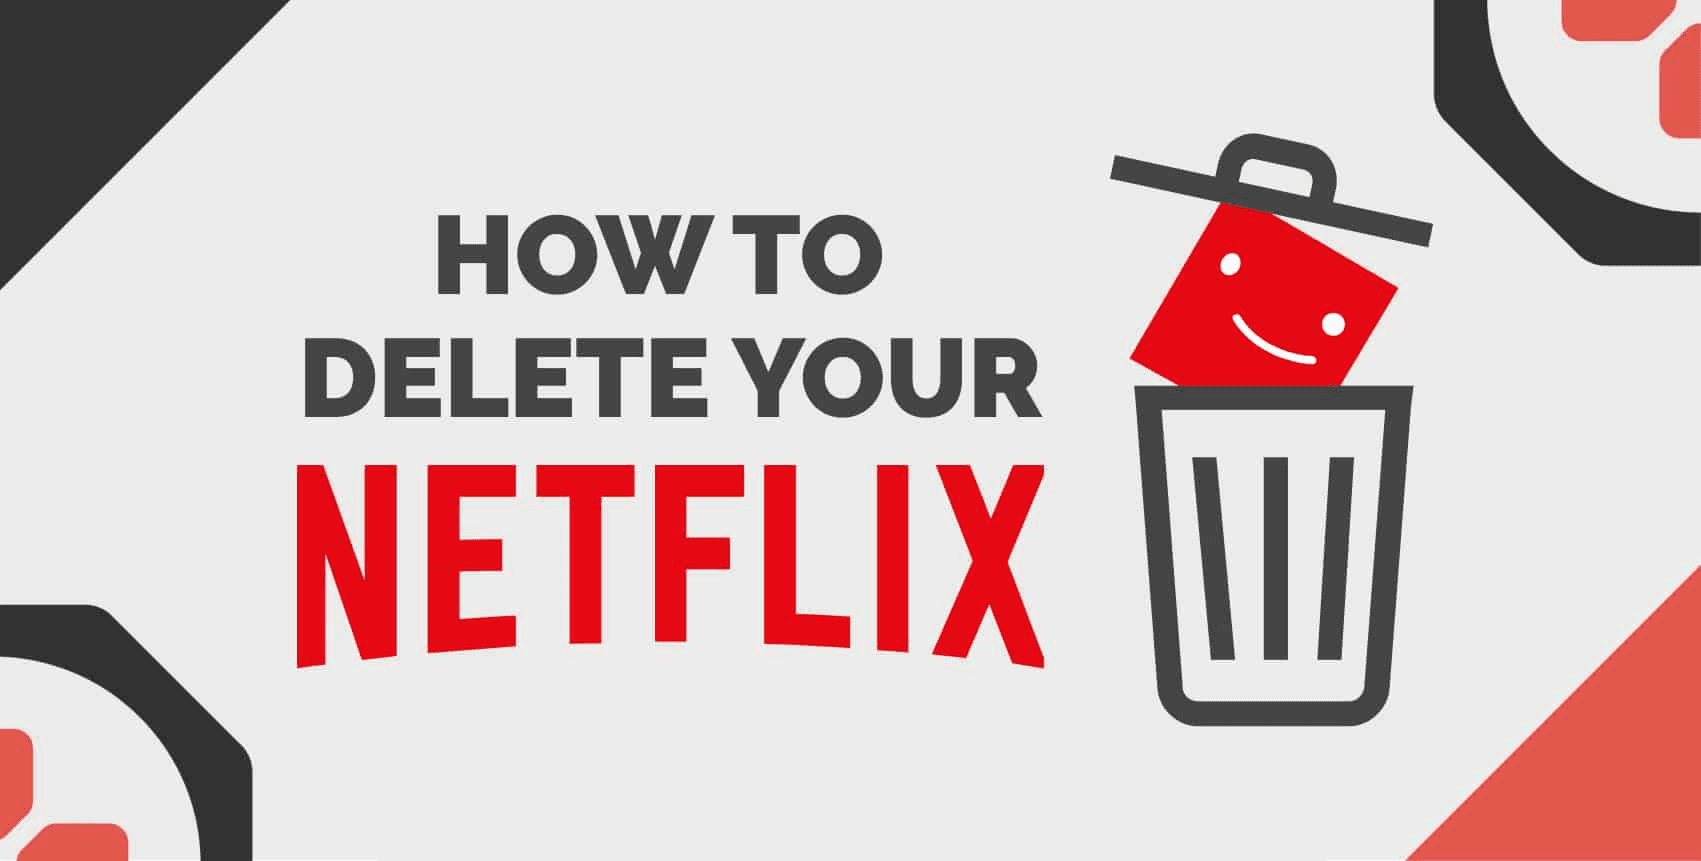 Here's how to cancel membership to Netflix.